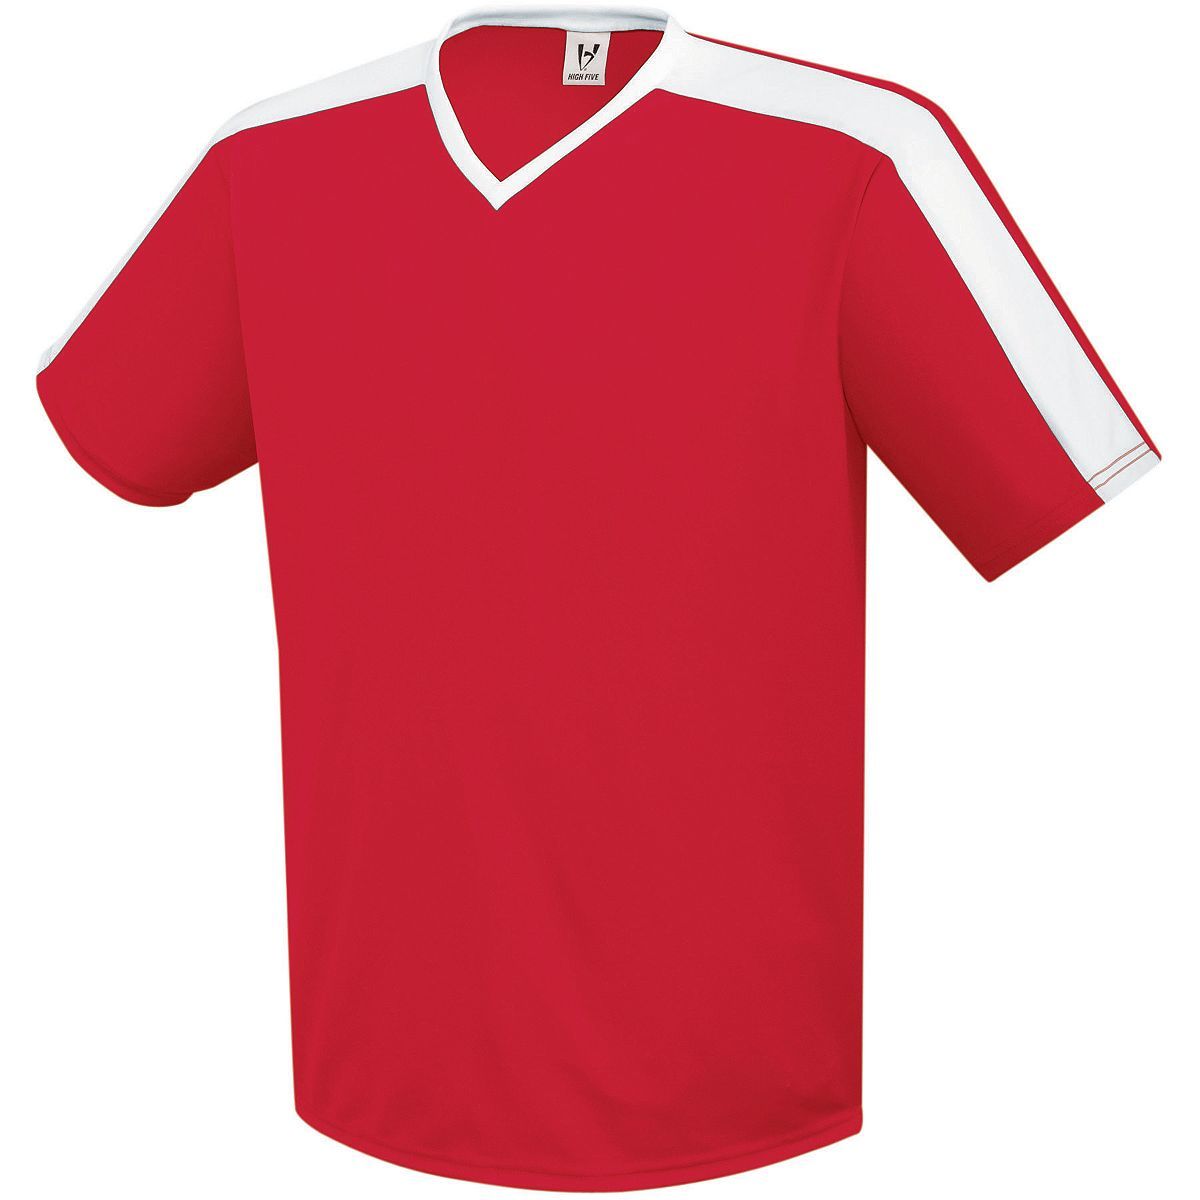 High 5 Youth Genesis Soccer Jersey in Scarlet/White  -Part of the Youth, Youth-Jersey, High5-Products, Soccer, Shirts, All-Sports-1 product lines at KanaleyCreations.com